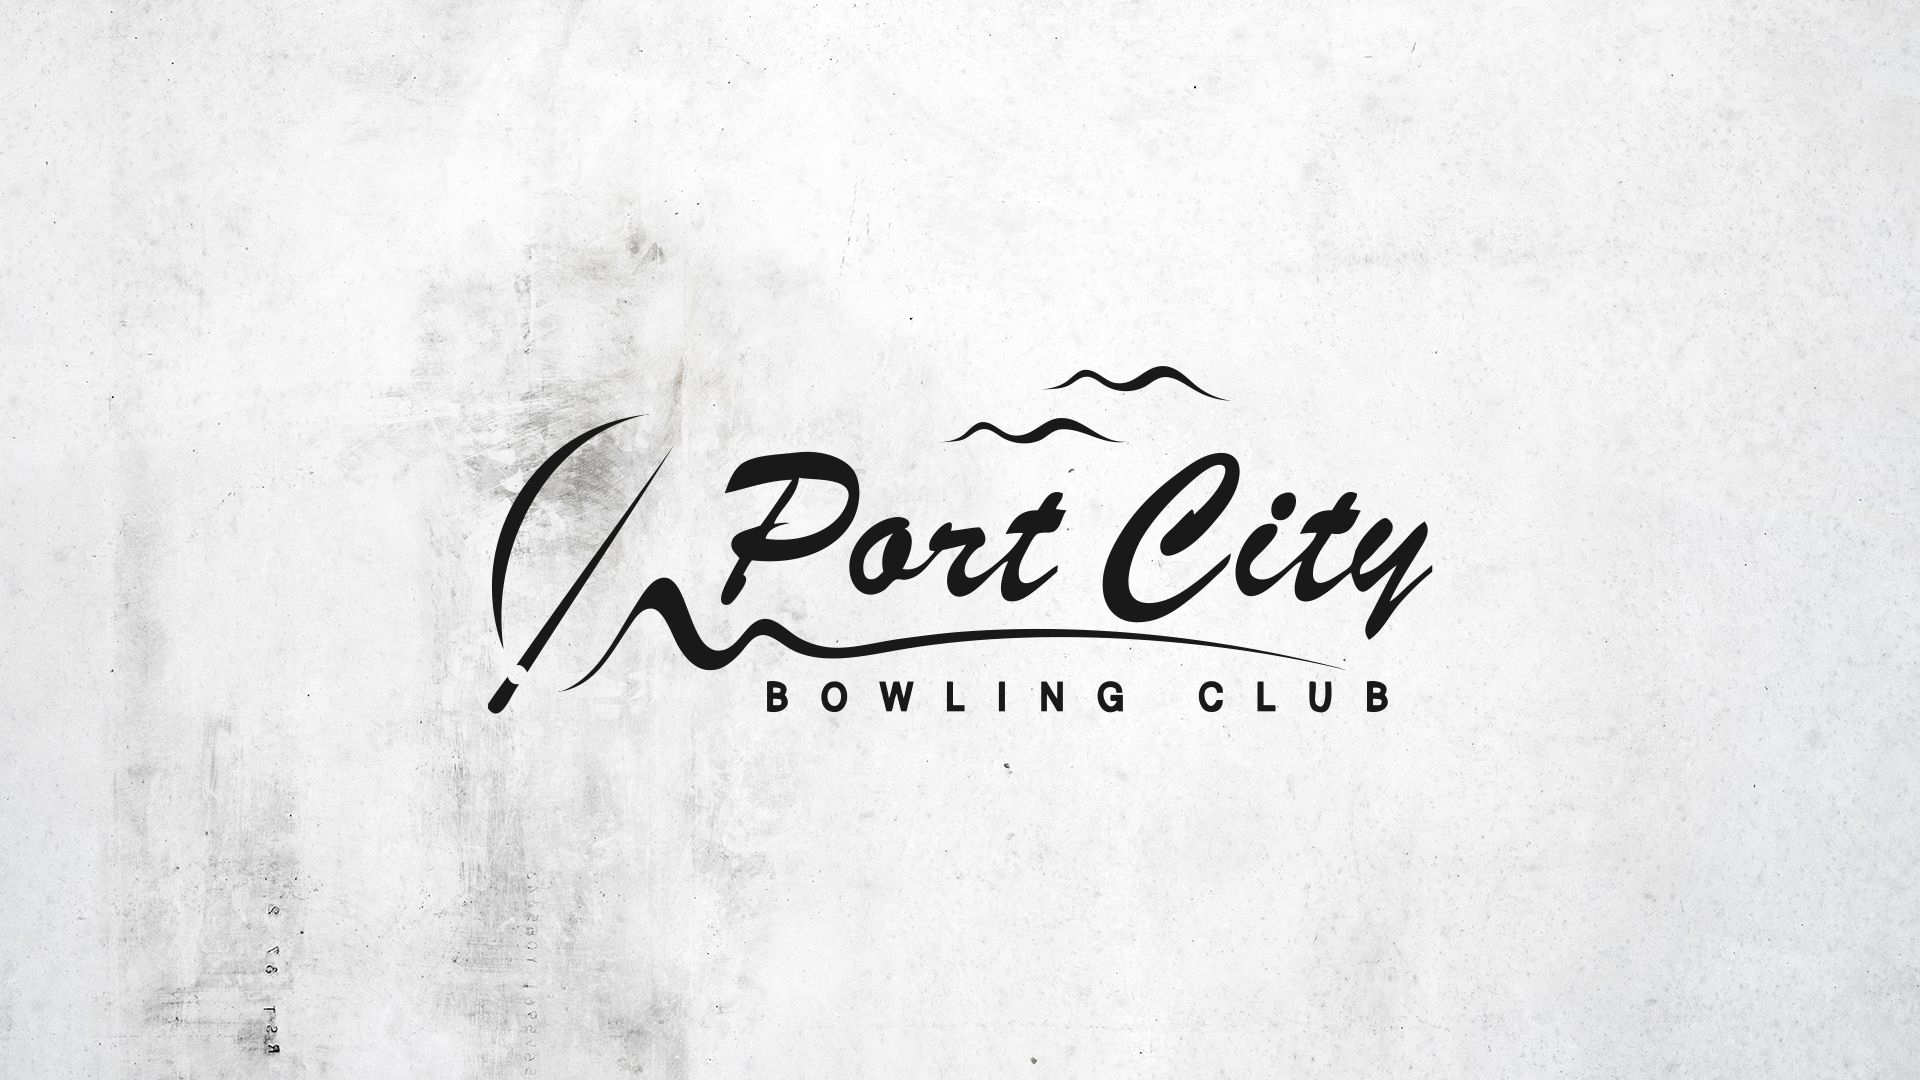 Check Out What We Did For Port City Bowling Club